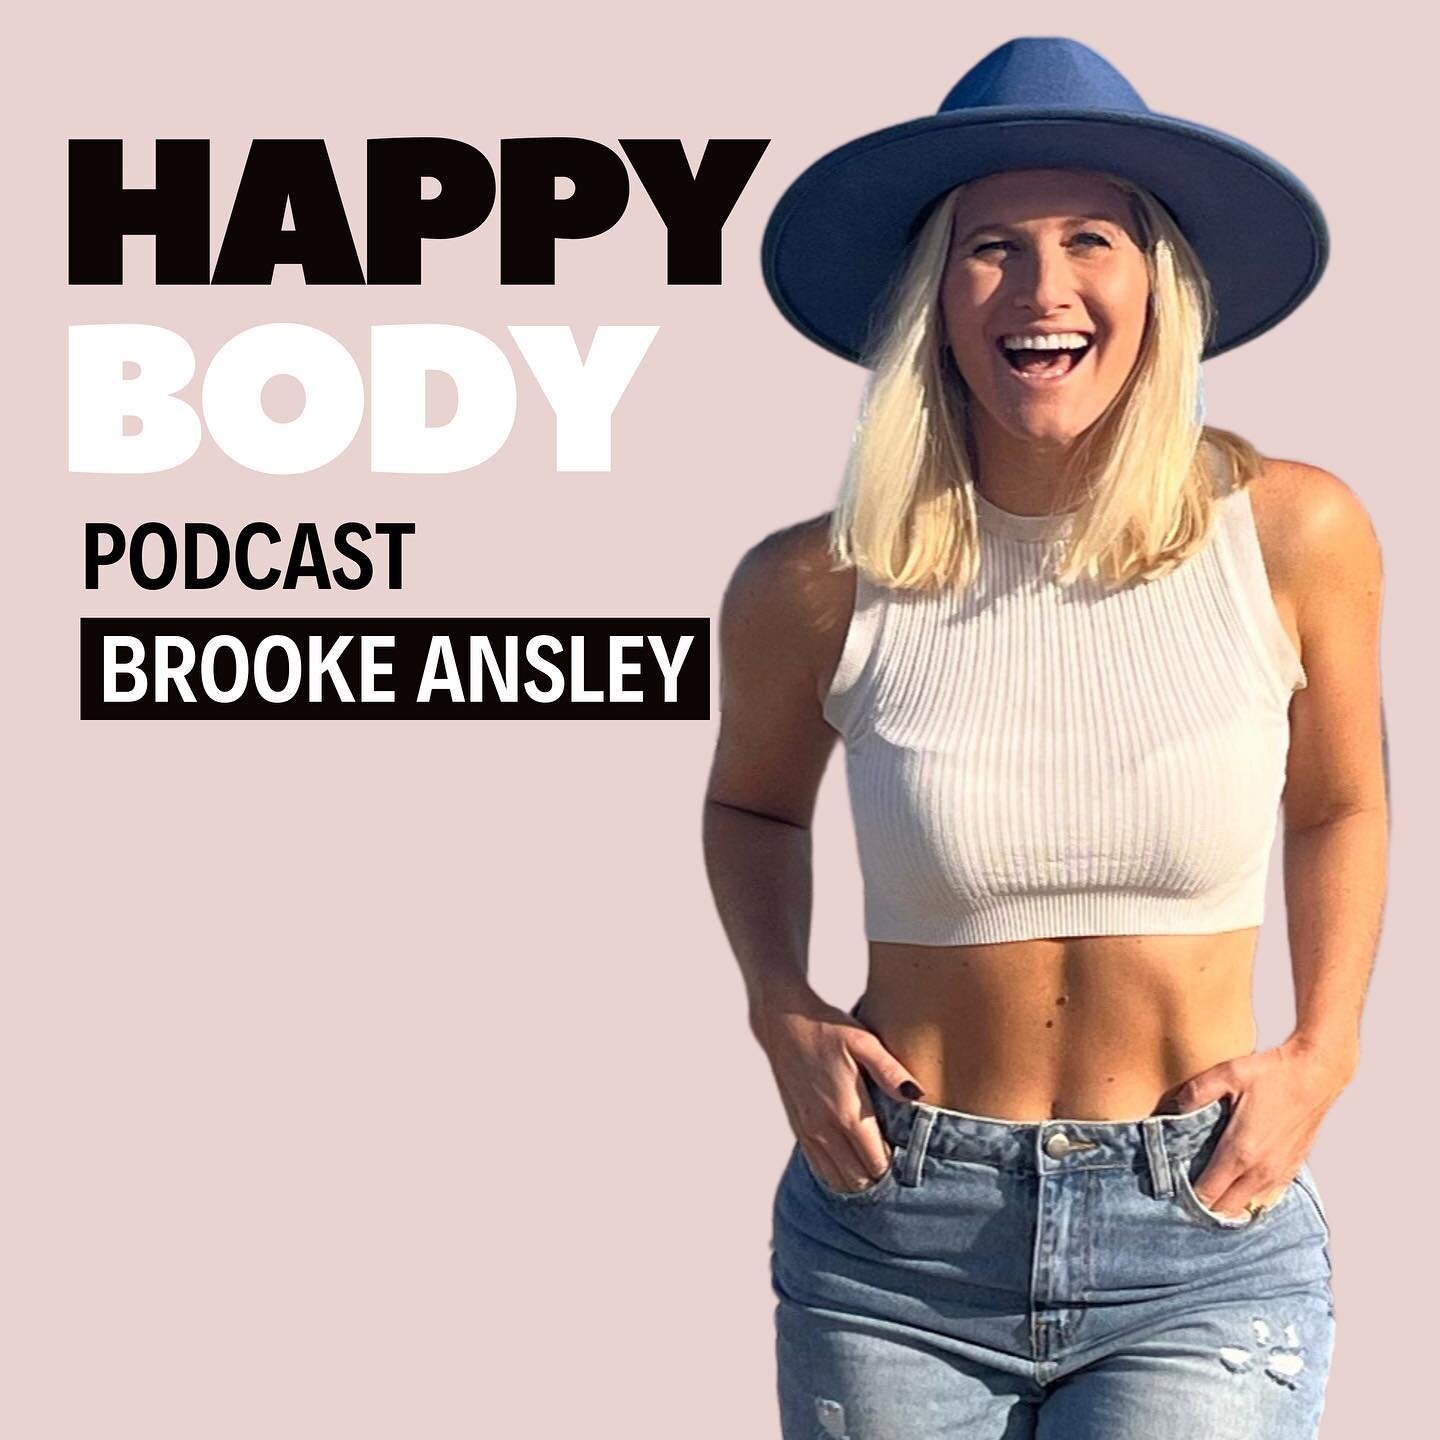 ⚡️If you&rsquo;re struggling with difficult emotions, changes in your body or simply want to understand how to get results that actually stick &mdash; the Happy Body Podcast is for you! 

I created Happy Body Podcast to help more women reconnect with